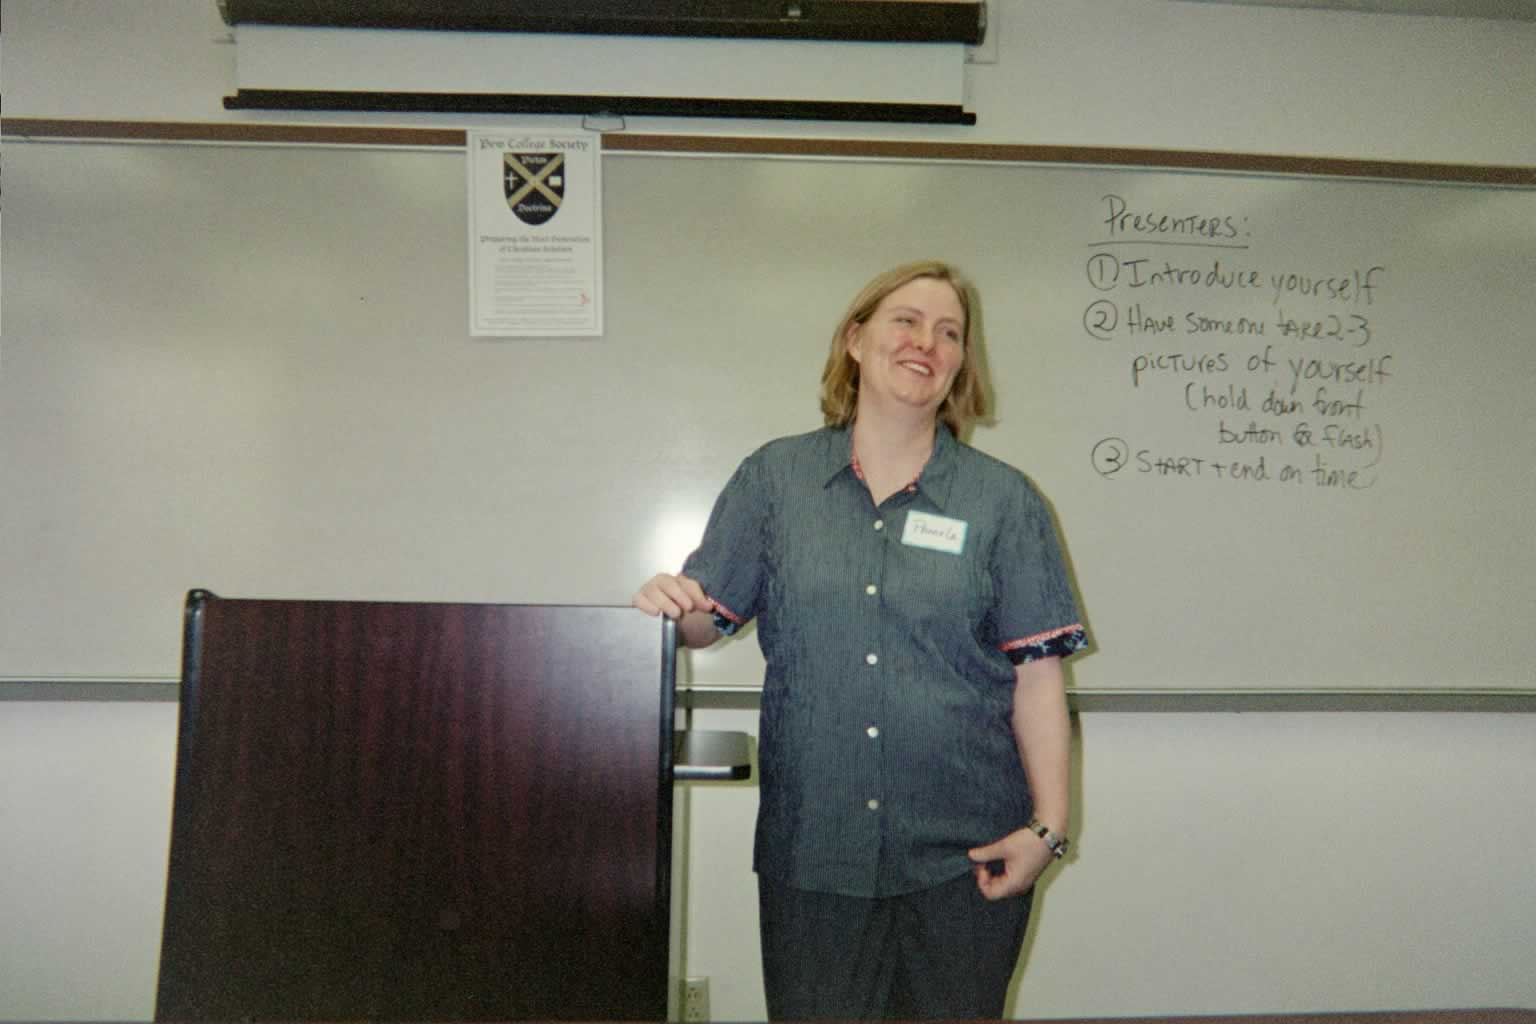 picture of a woman smiling next to a podium in a classroom